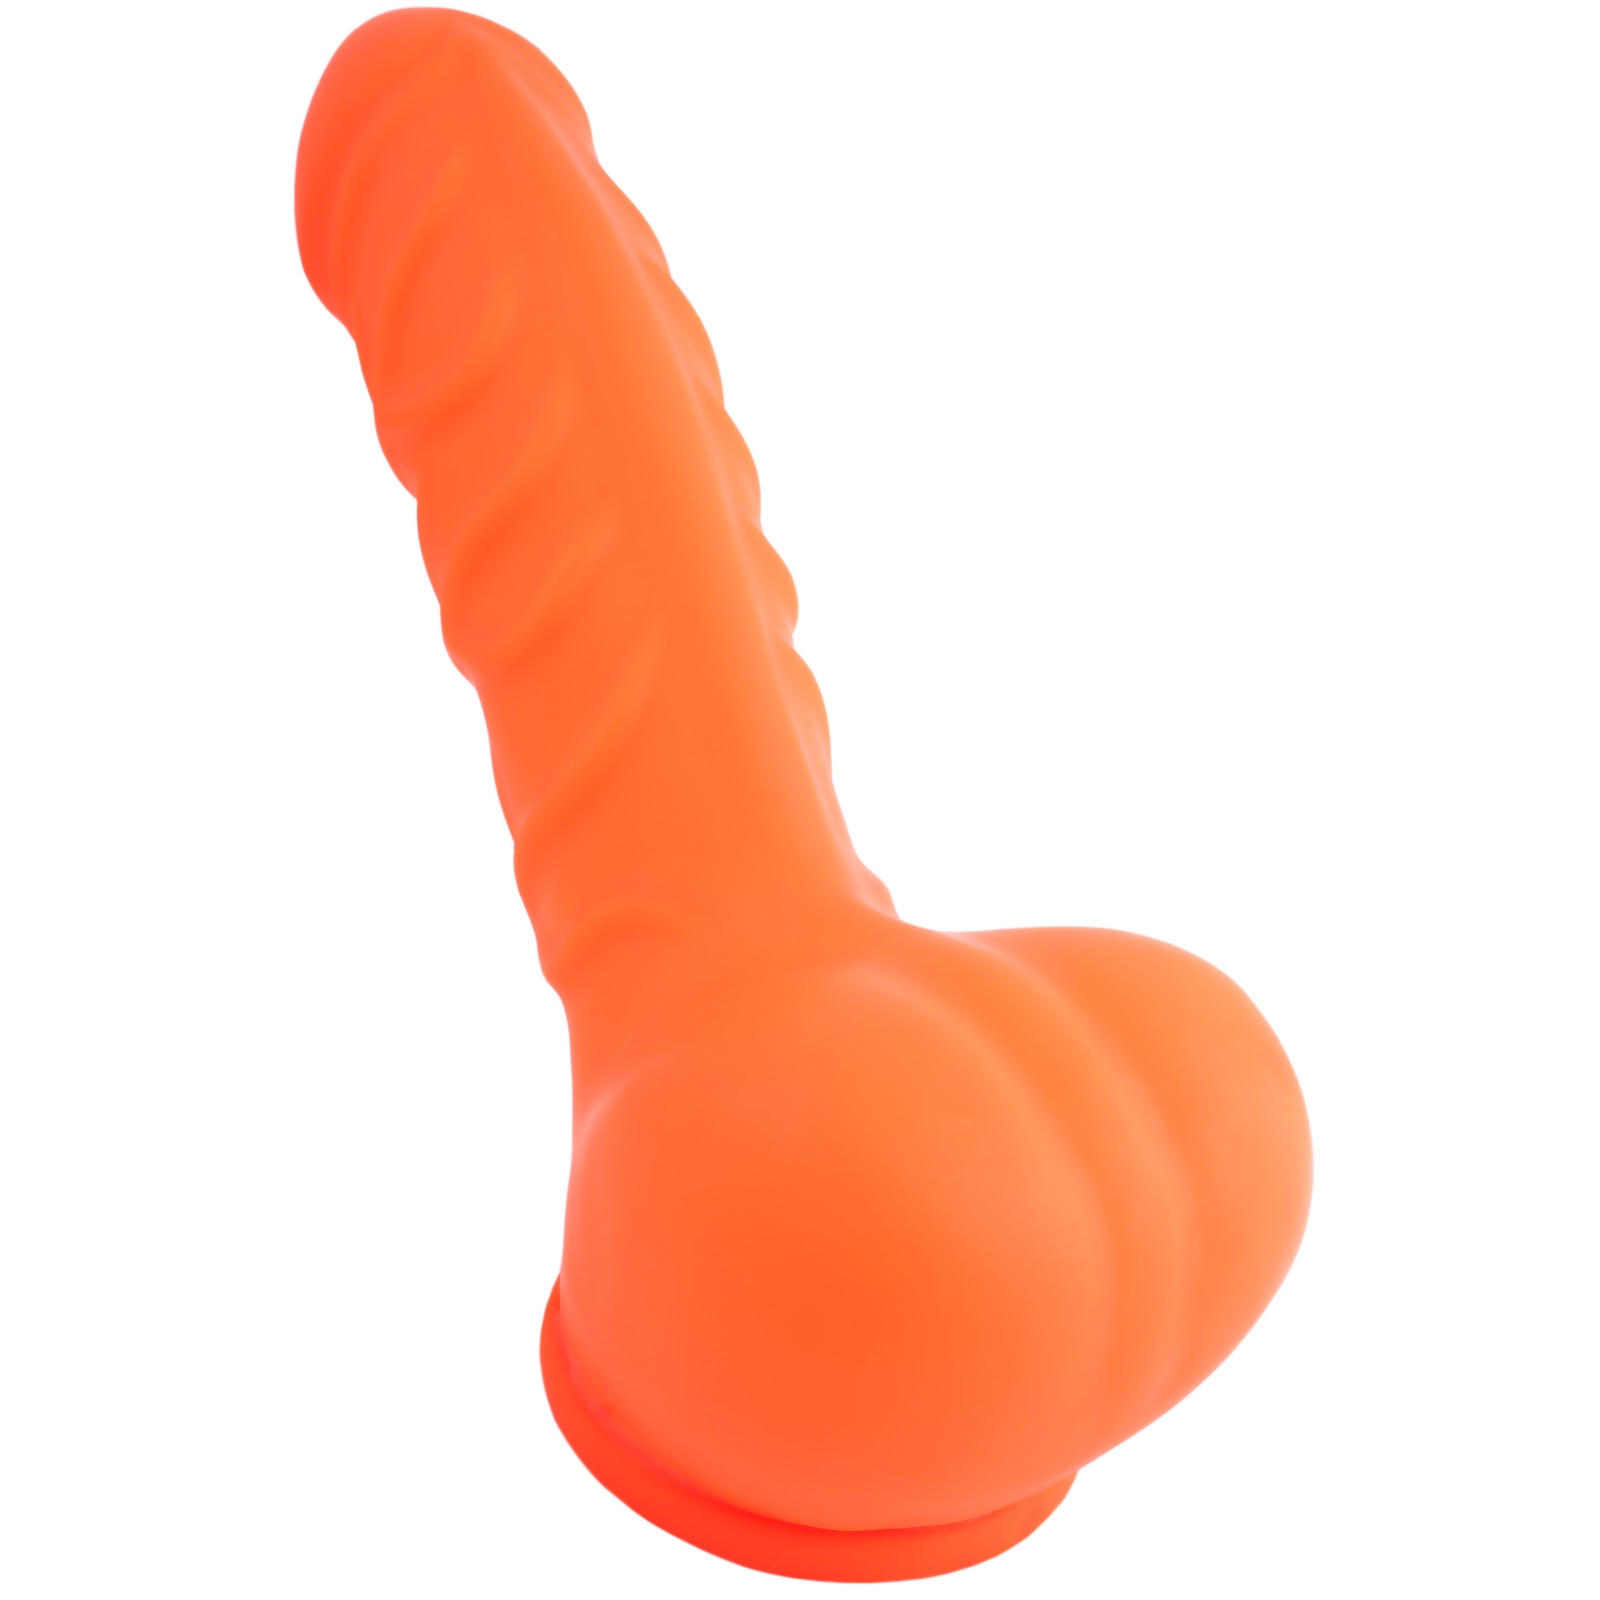 Toylie Latex Penis Sleeve «FRANZ» neon orange (glow effect), with strong veins and molded scrotum